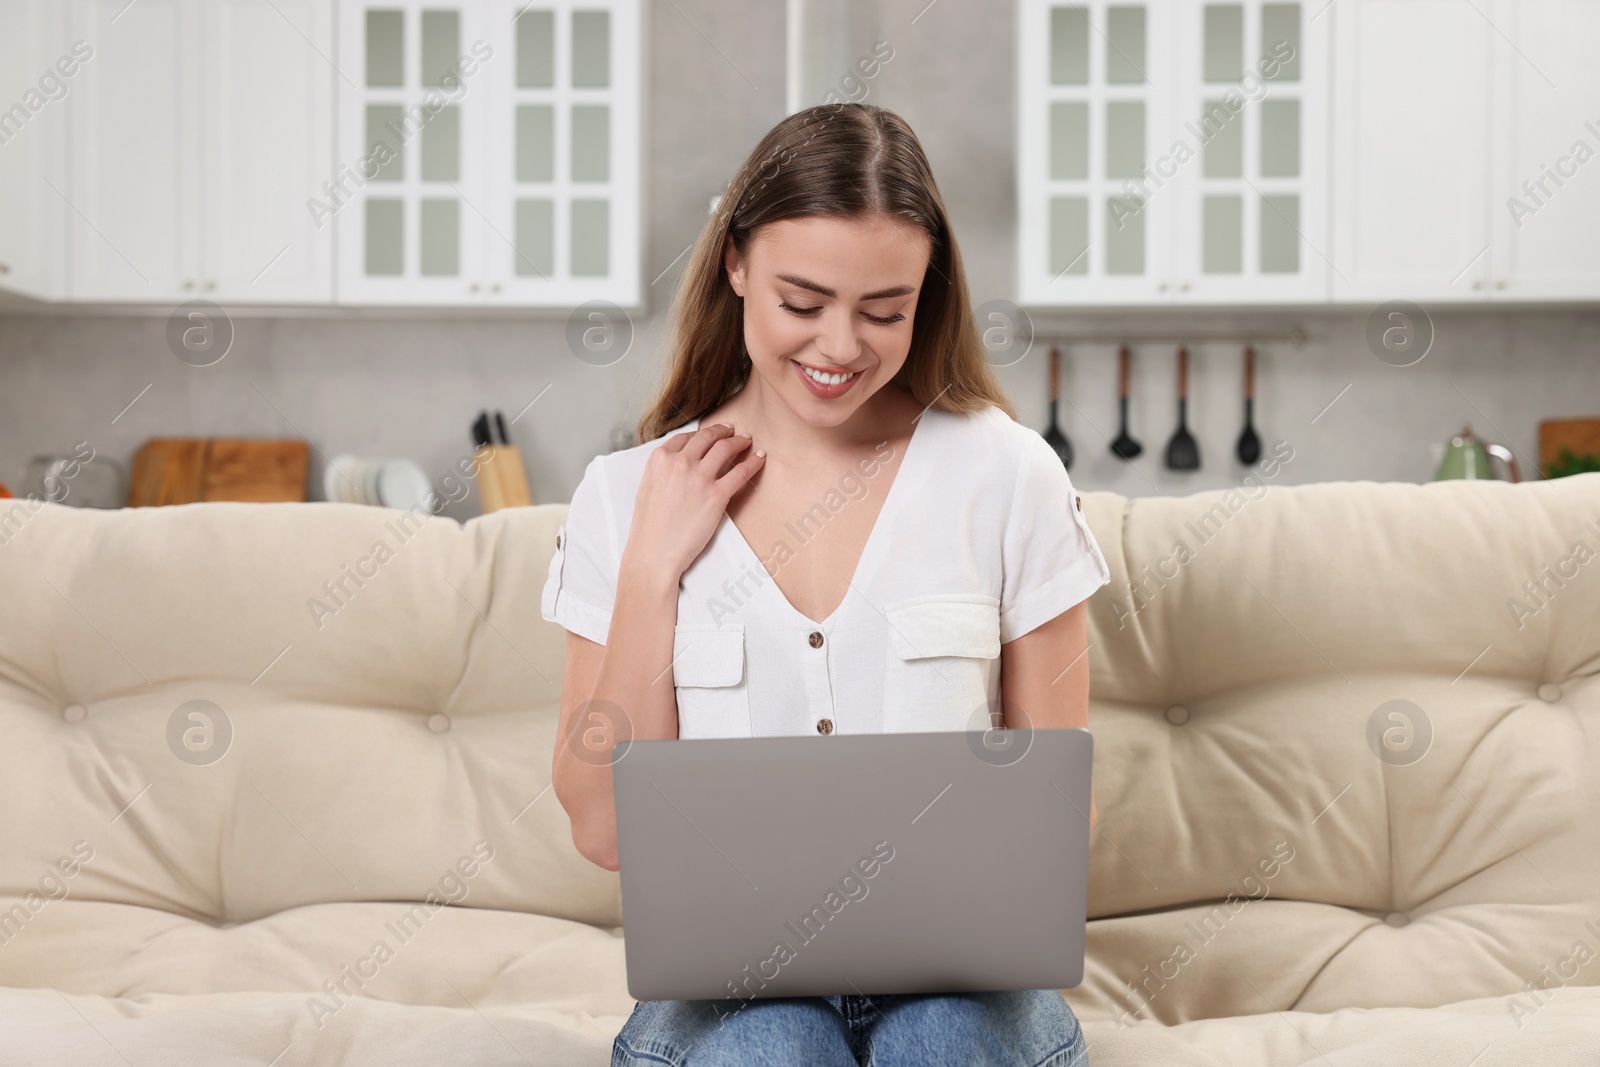 Photo of Happy woman with laptop on couch in room